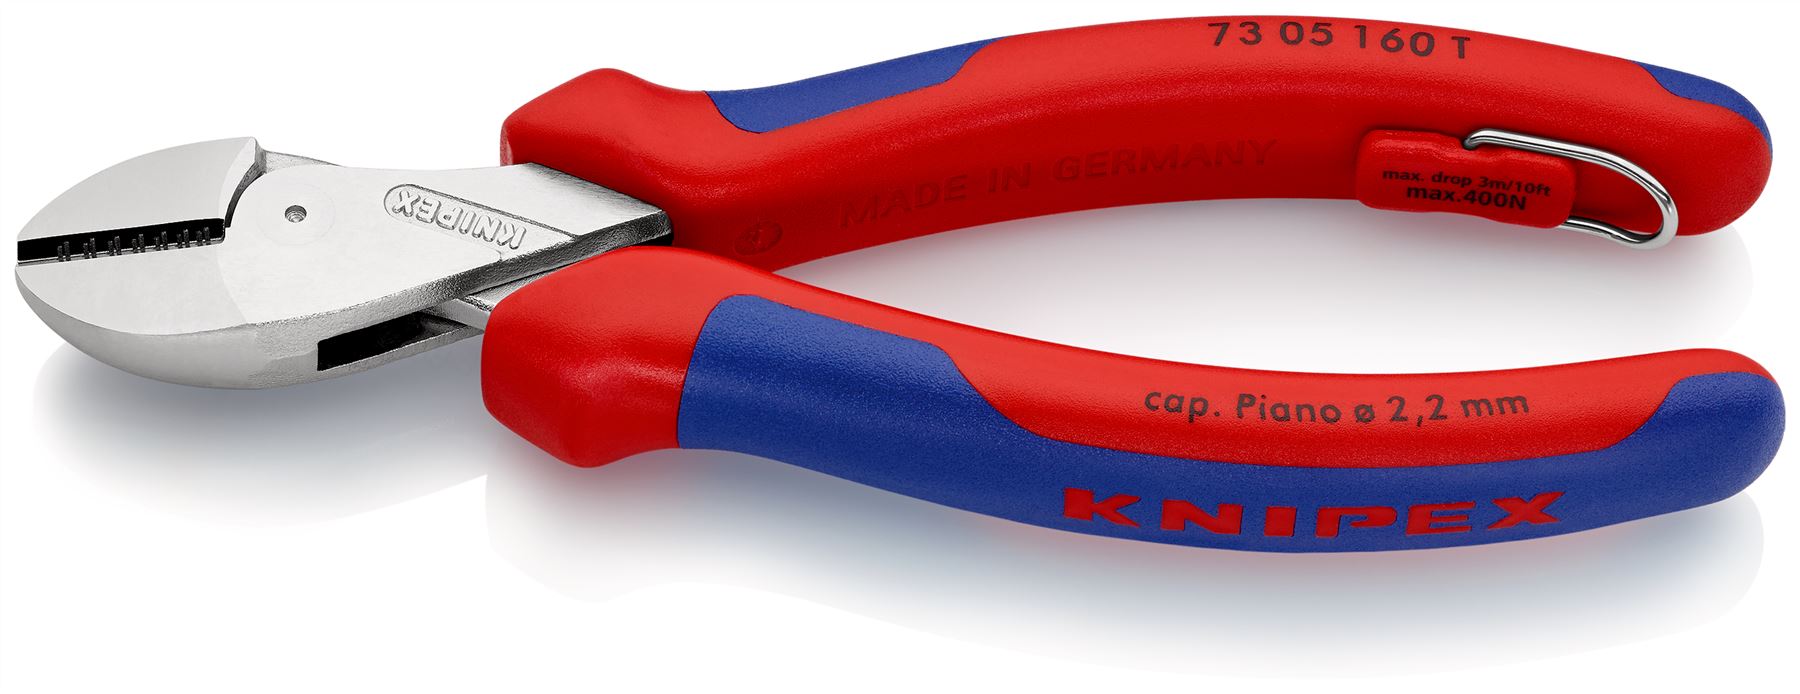 Knipex X-Cut Diagonal Side Cutting Pliers 160mm Tether Point Multi Component Grips Chrome Plated 73 05 160 T